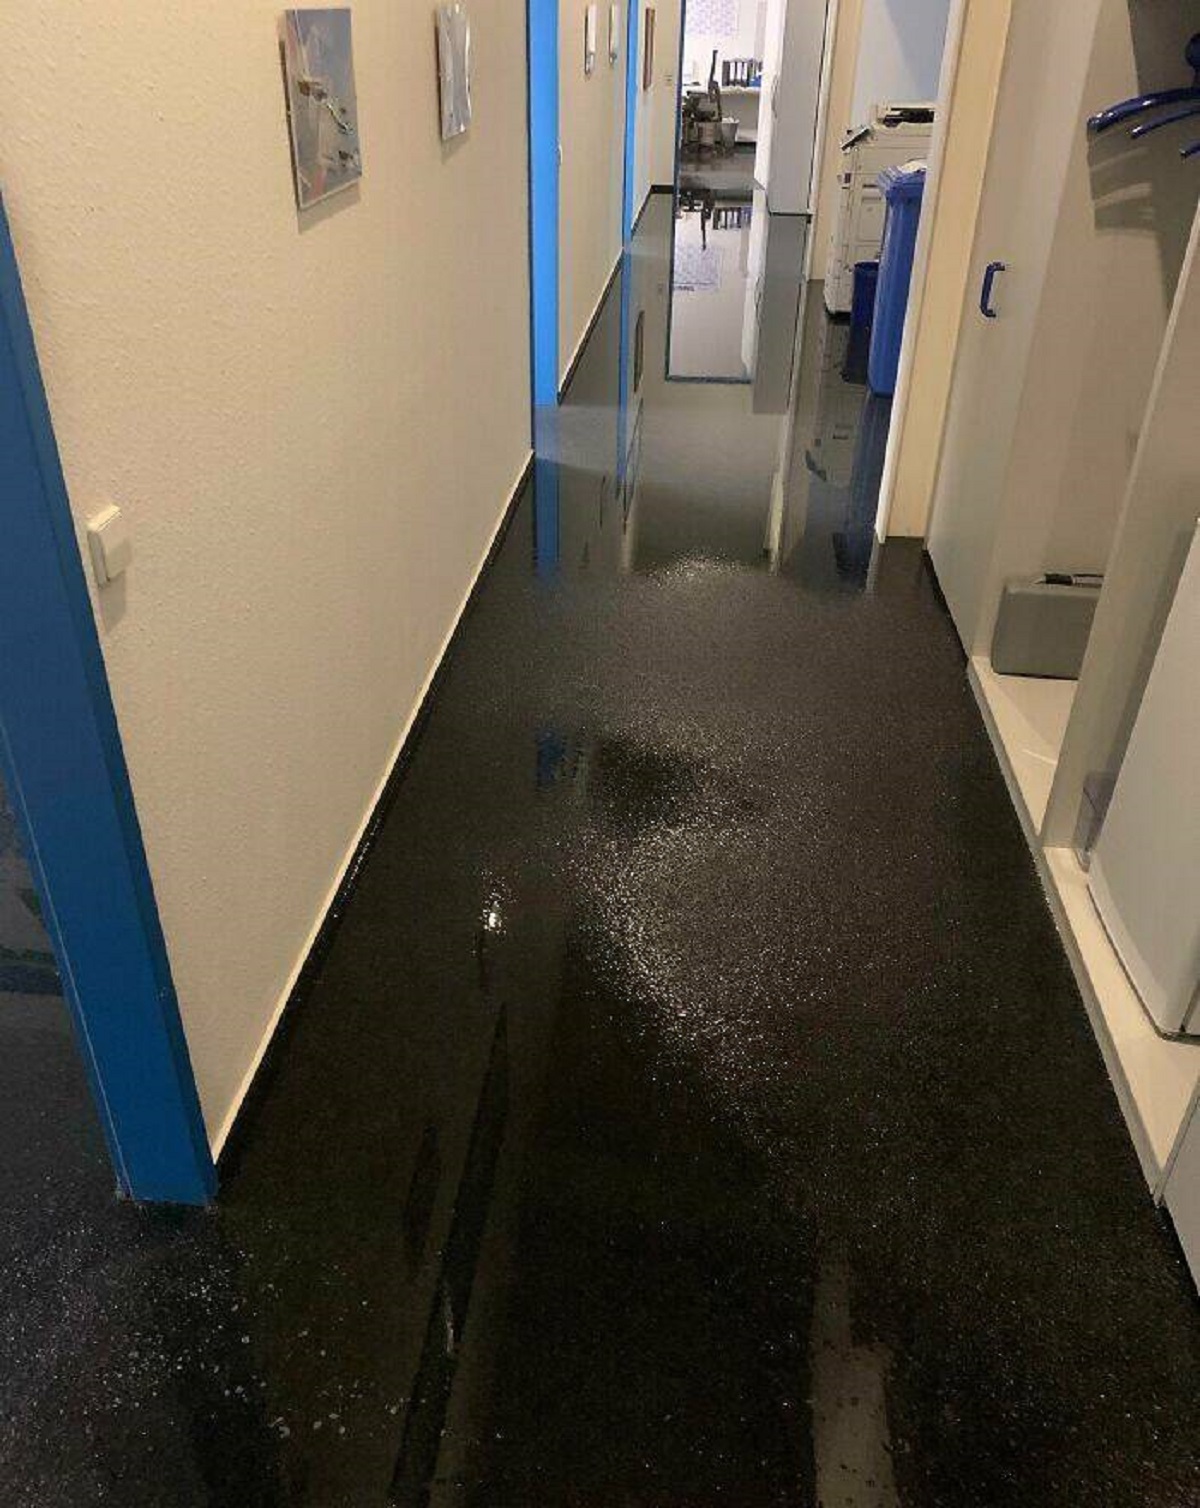 "My Boss Installed A Water Dispenser Yesterday. This Morning We Got Into The Office To This"